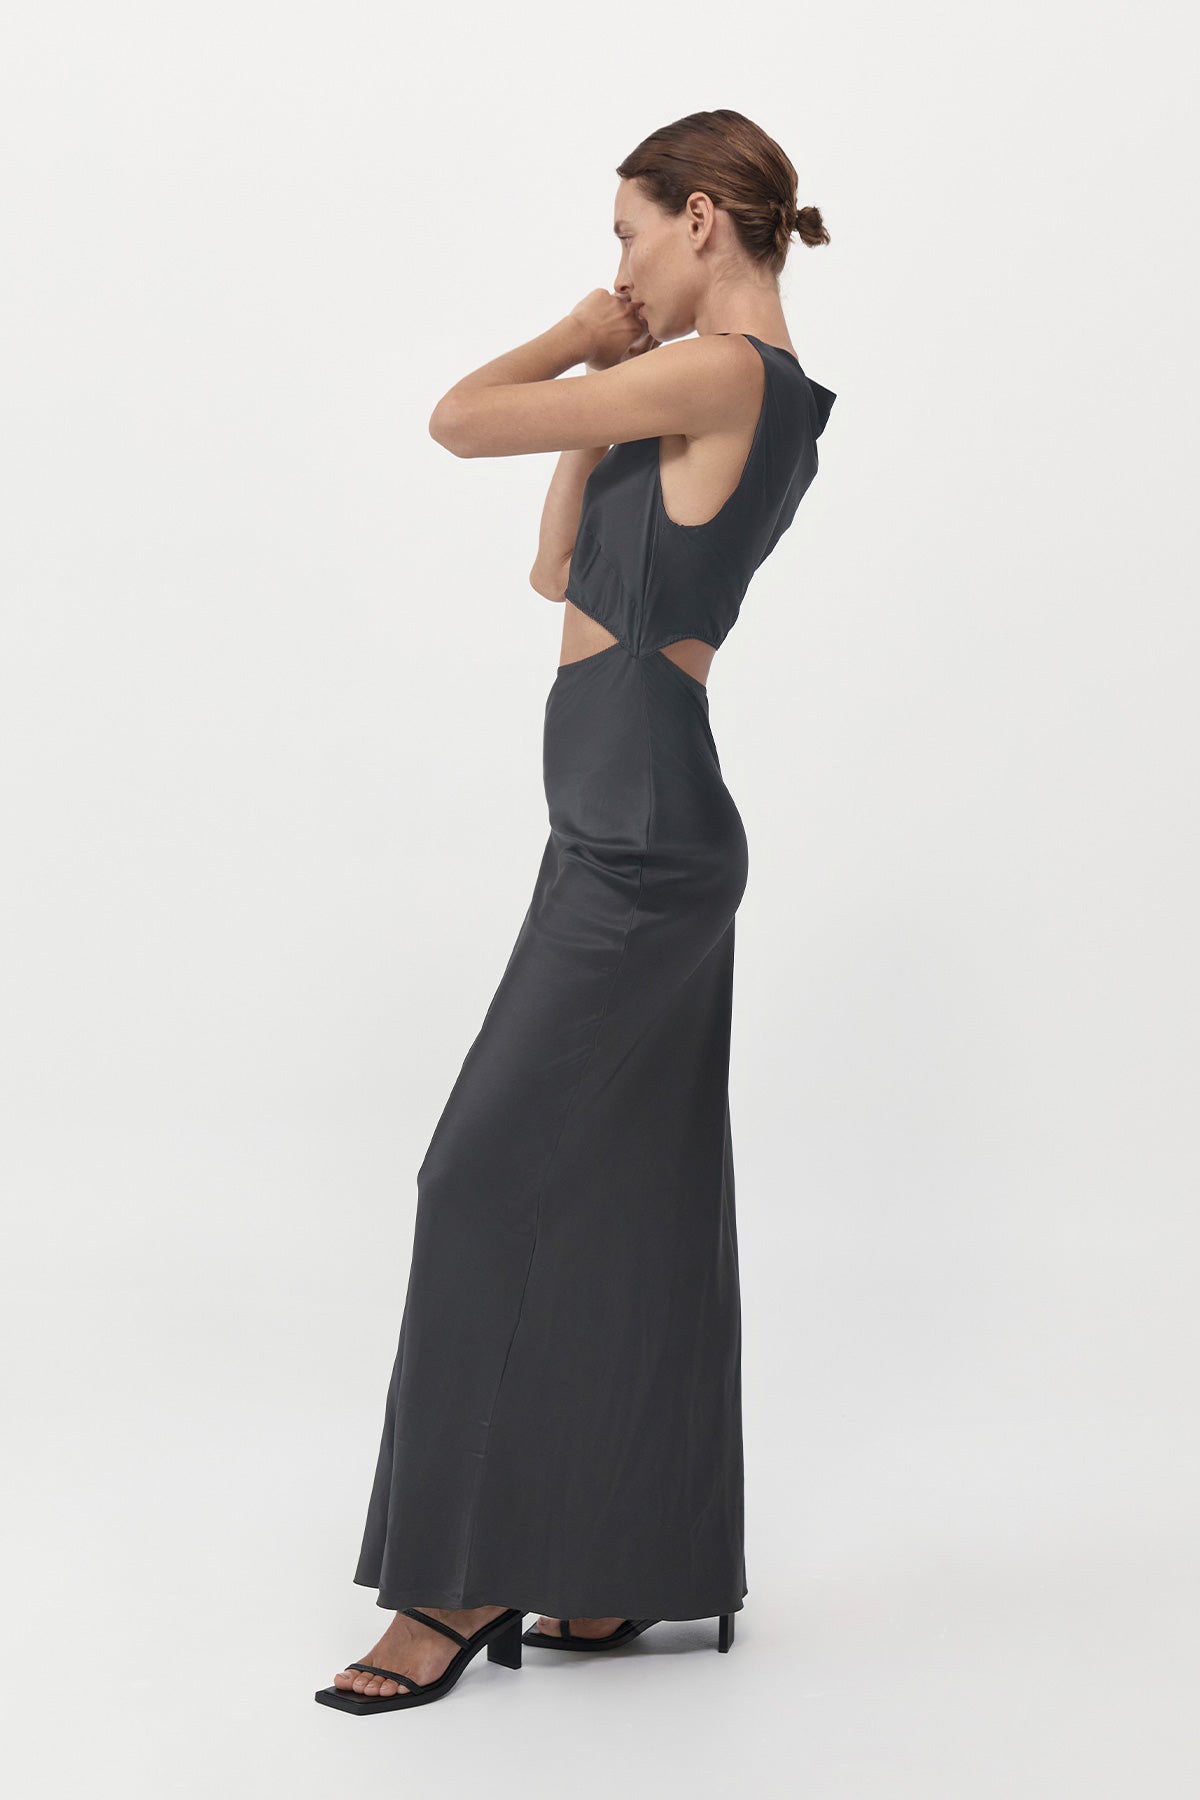 St Agni Soft Silk Cut Out Dress in Washed Black available at TNT The New Trend Australia